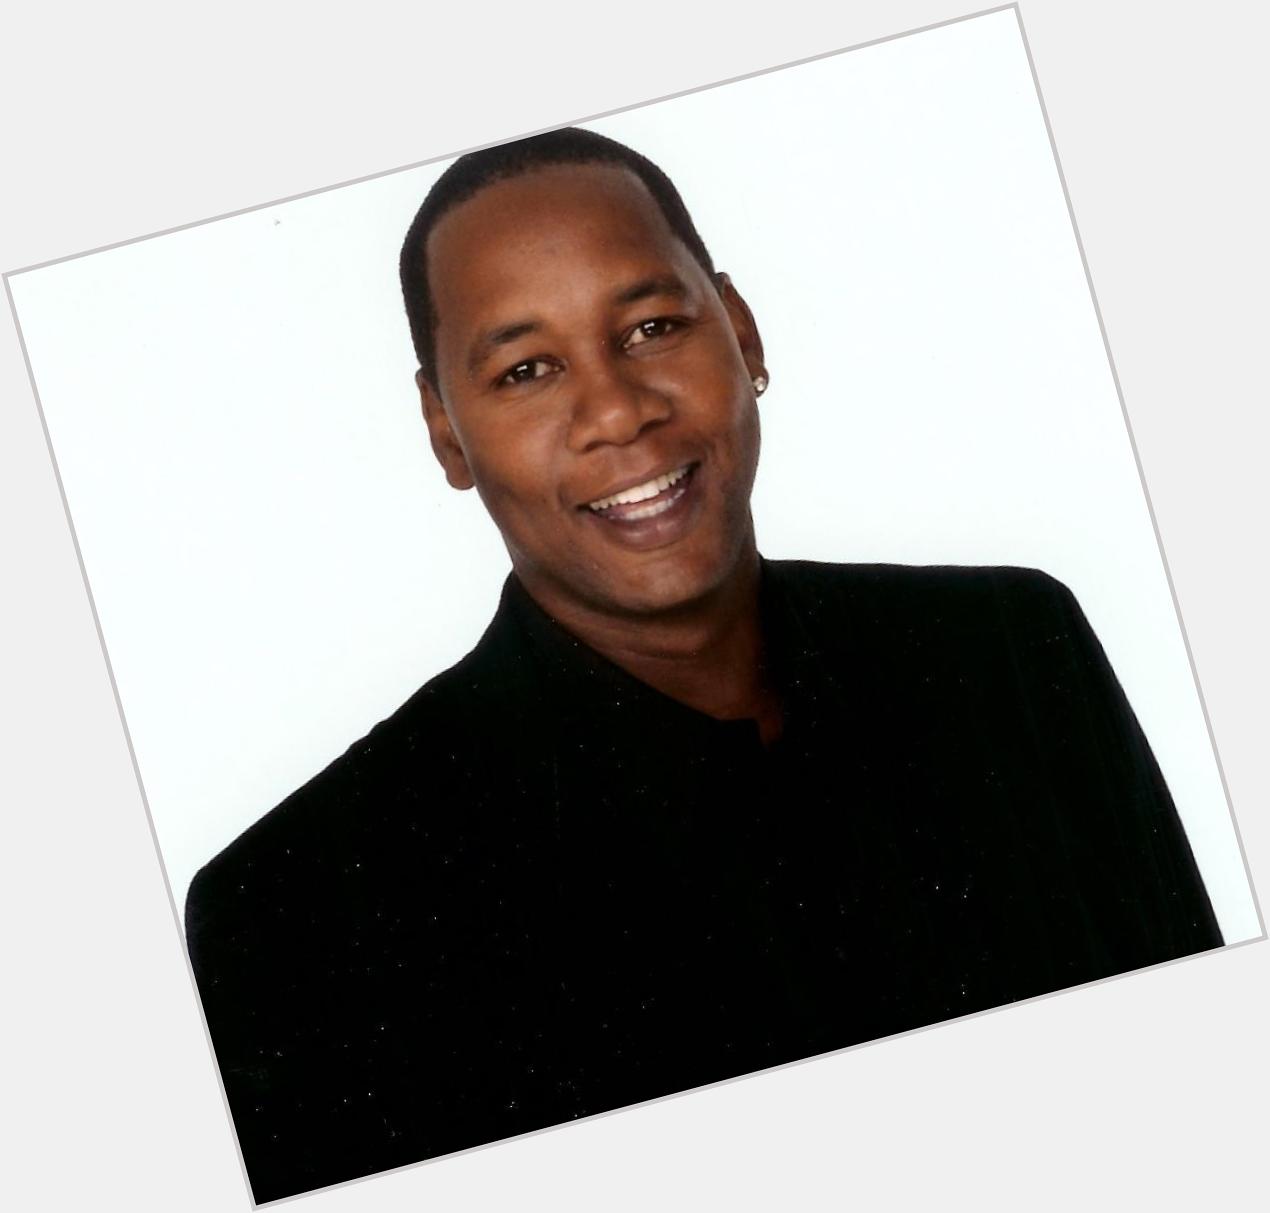   would like to wish Mark Curry, a very happy birthday.  